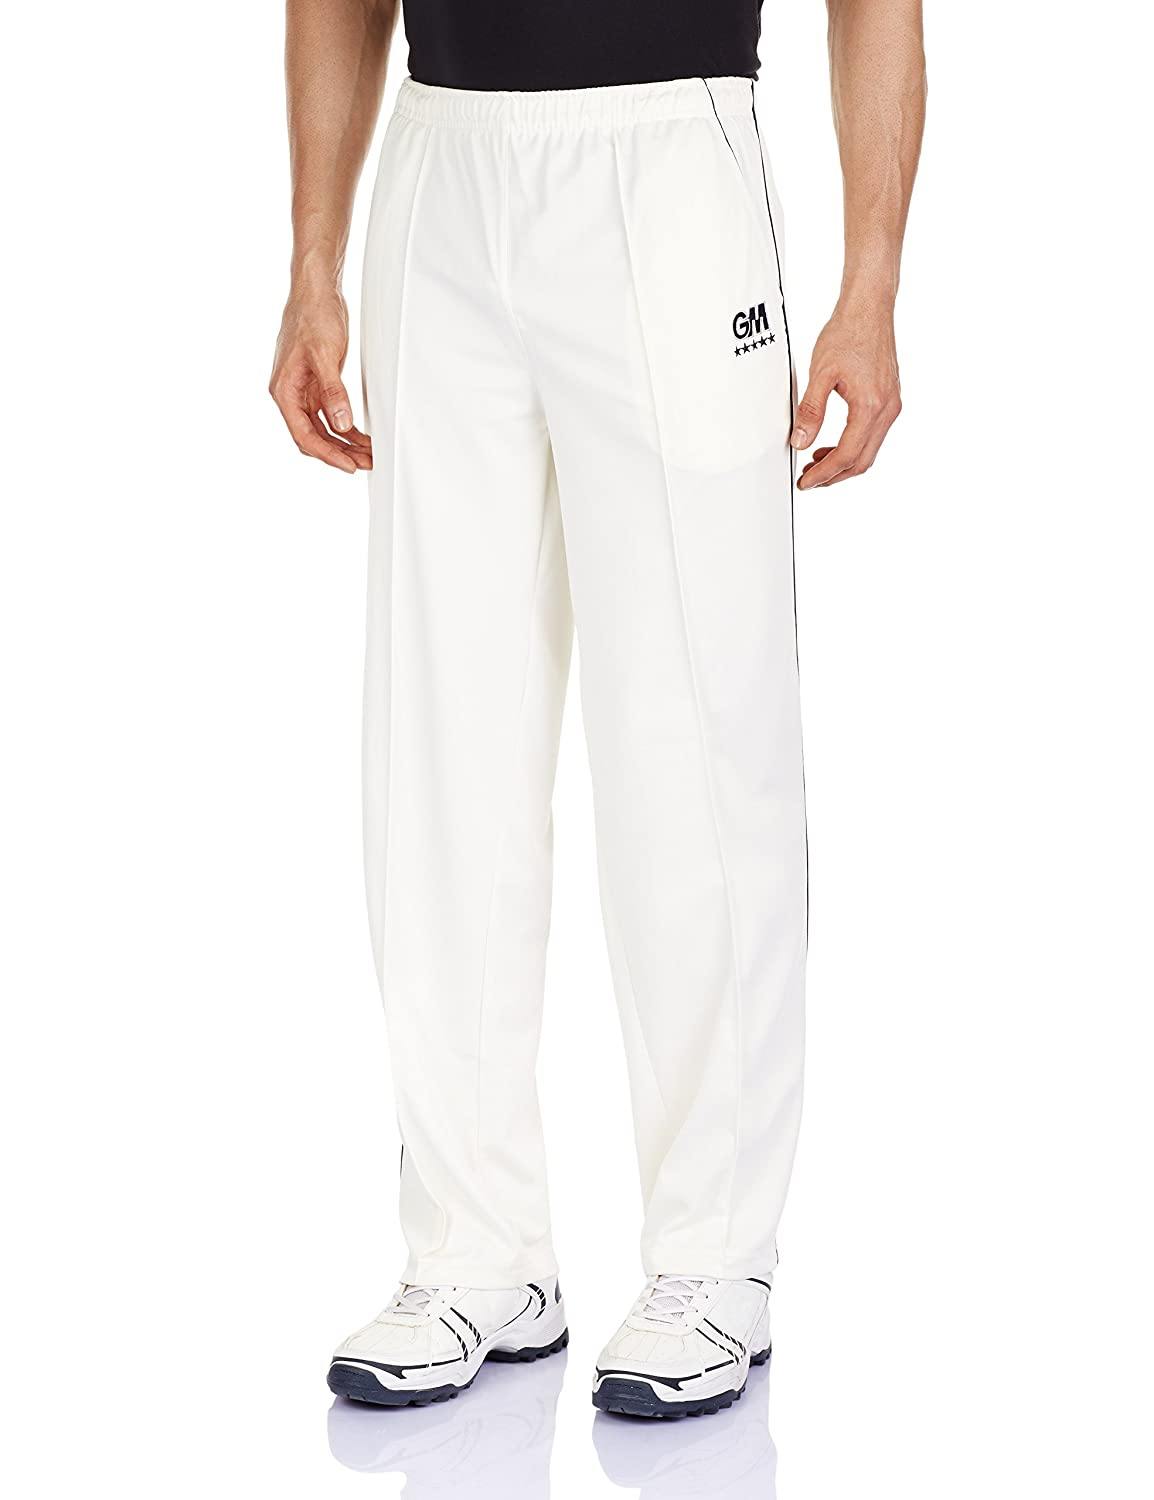 TYKA Premier Cricket Trouser Coloured Ink Royal M Waist  32   Amazonin Clothing  Accessories